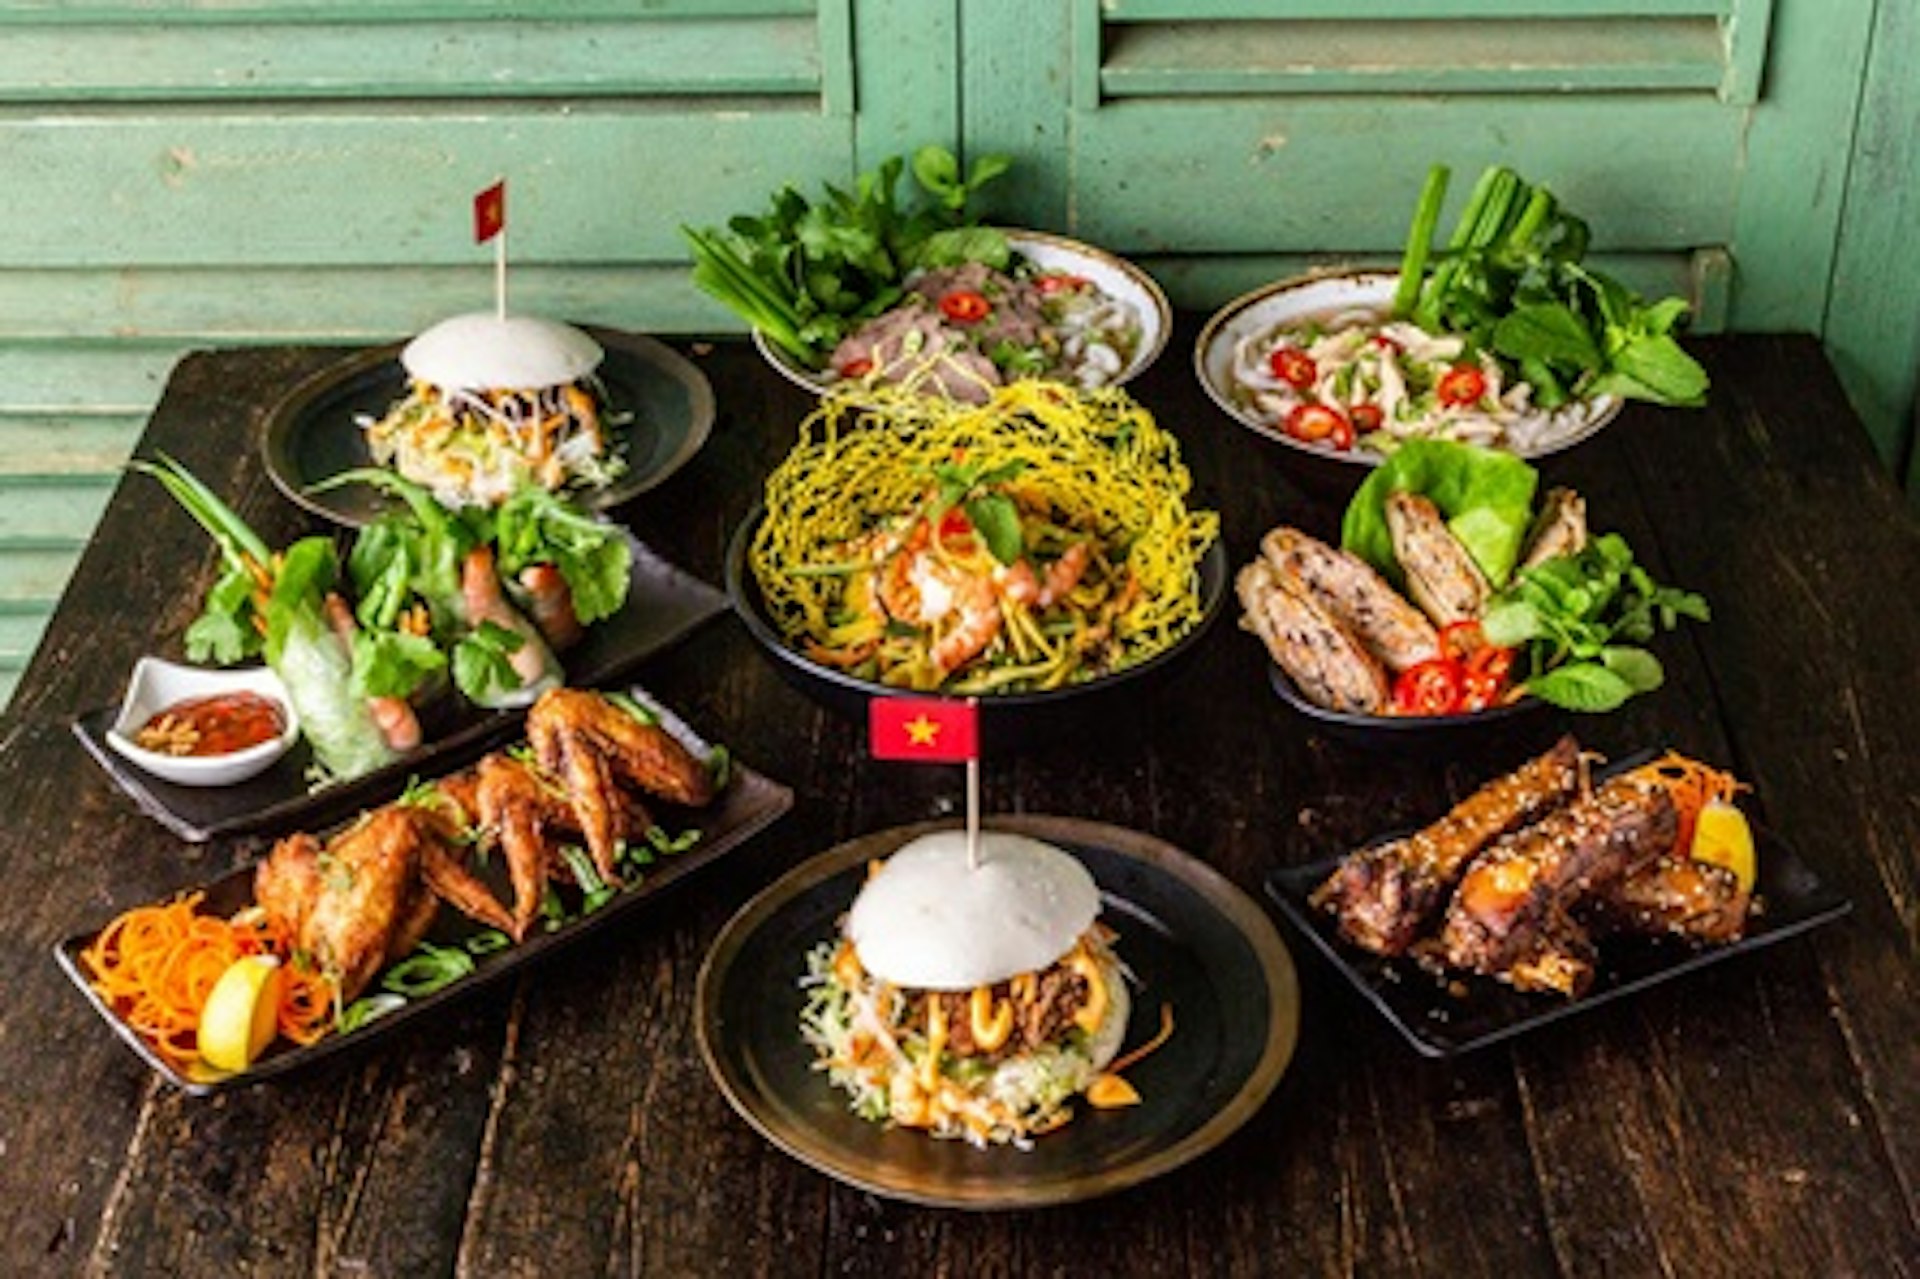 Four Course Vietnamese Street Food Dining Experience with Wine for Two at Pho & Bun 1